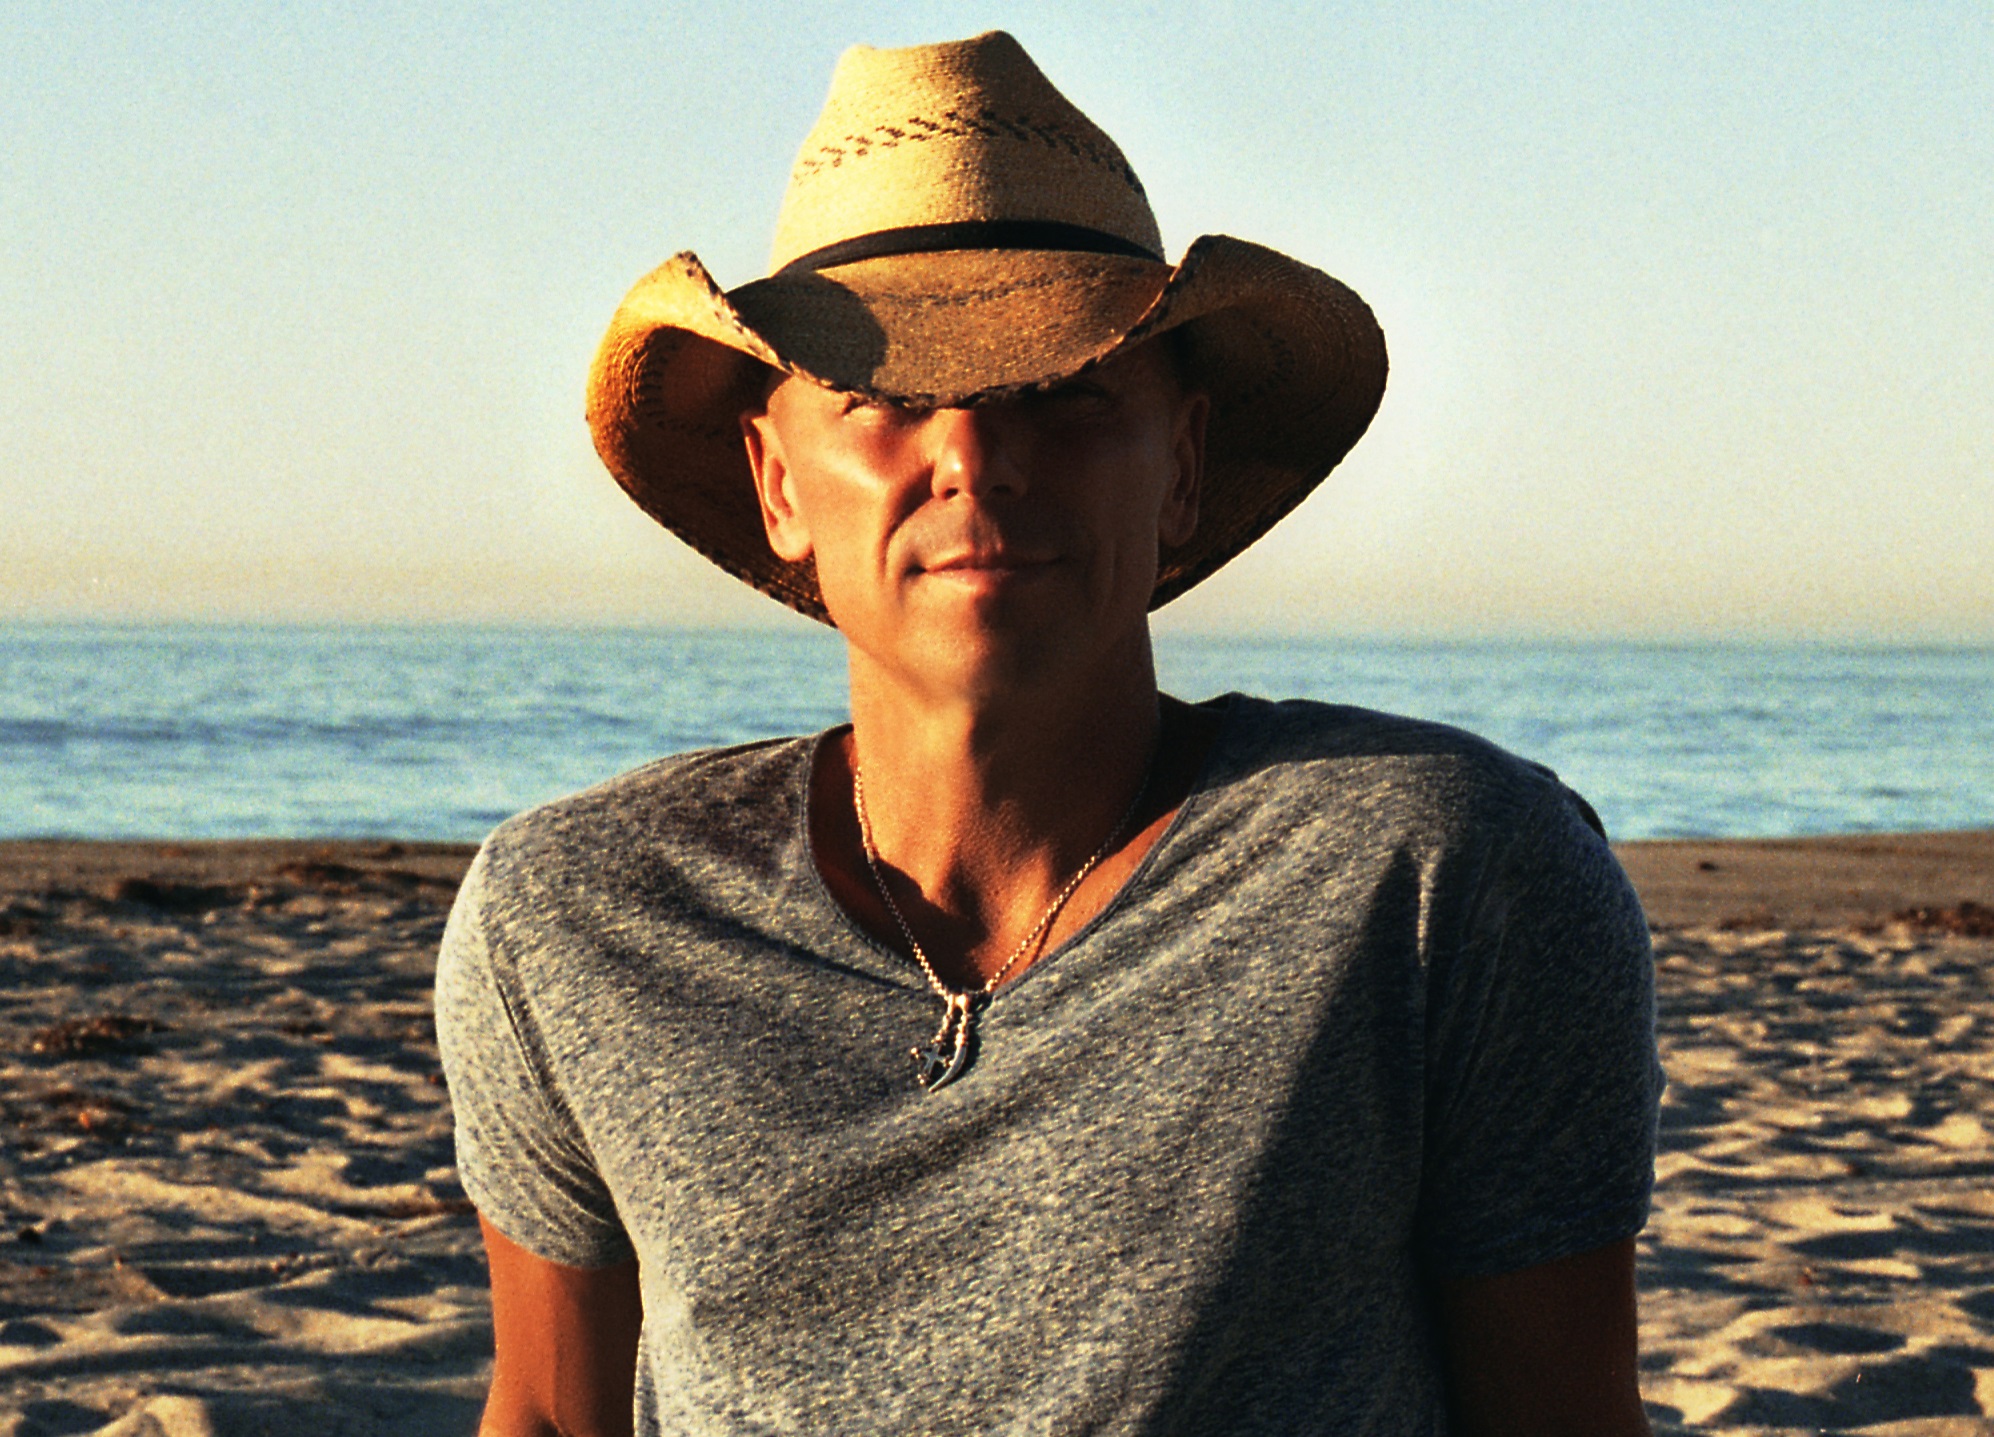 Kenny Chesney Tries to Impress 'All the Pretty Girls' With New Single - Sounds Like Nashville